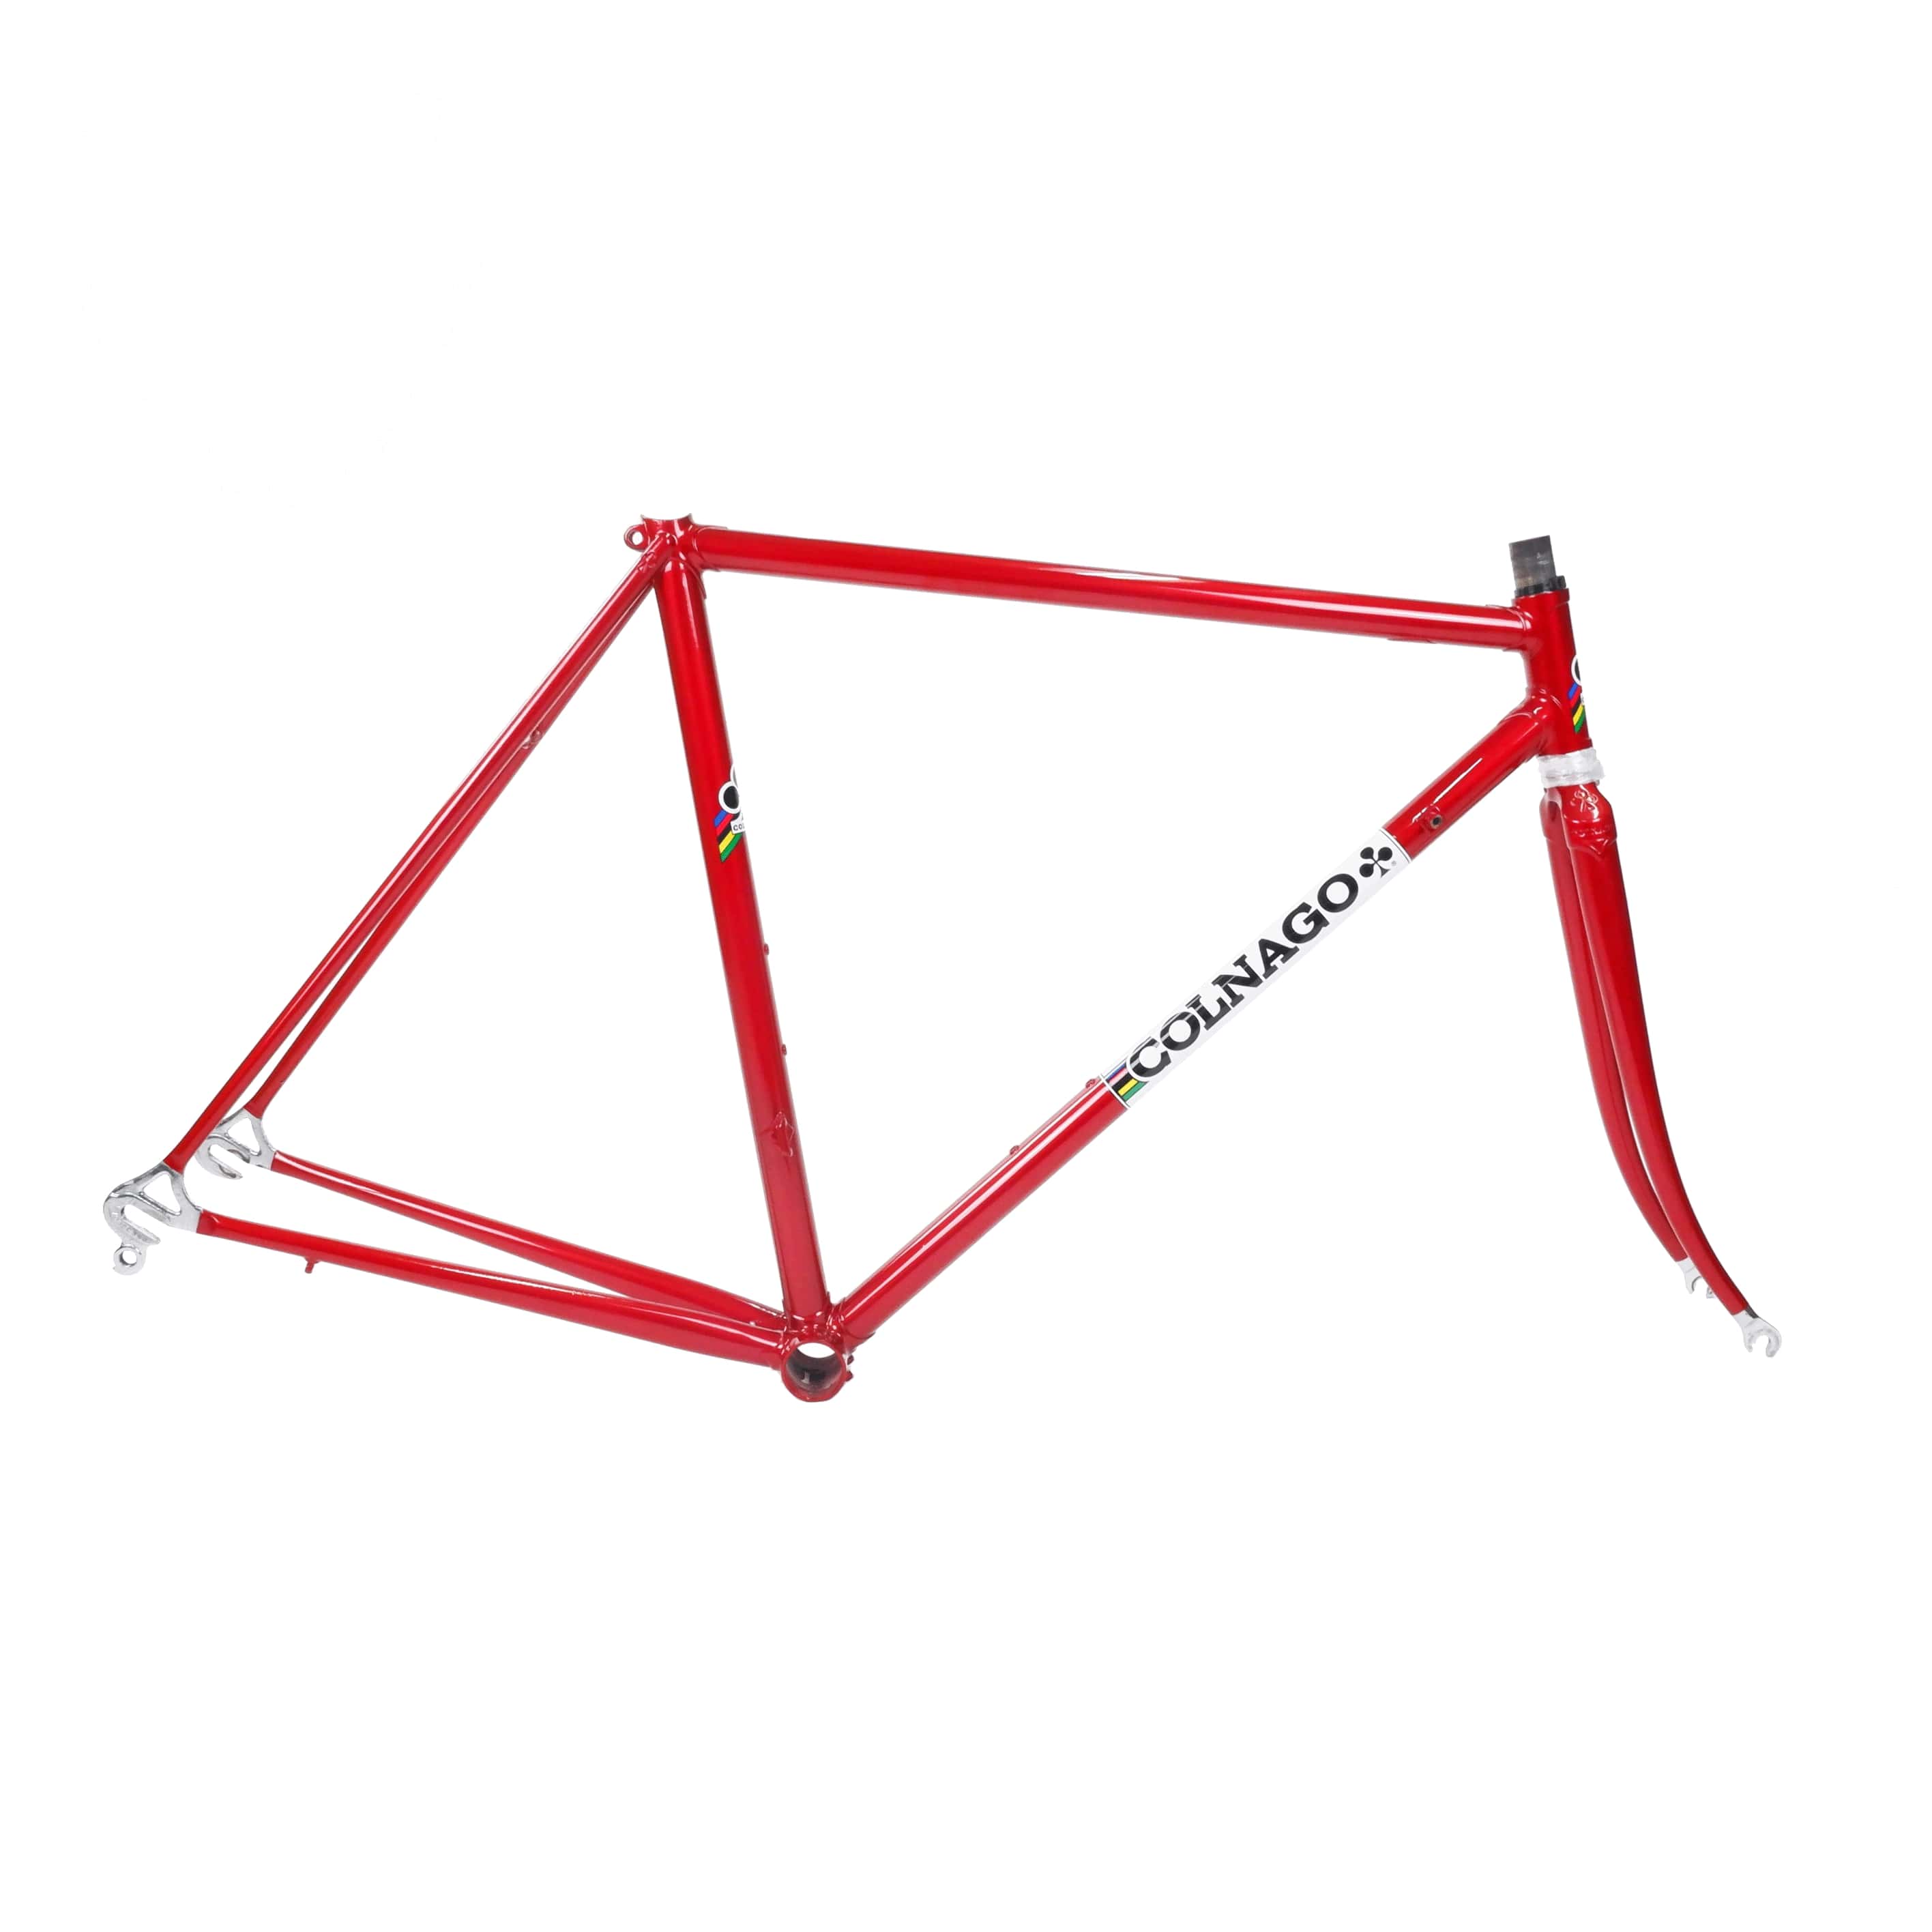 Colnago Super red and white frame drive side picture